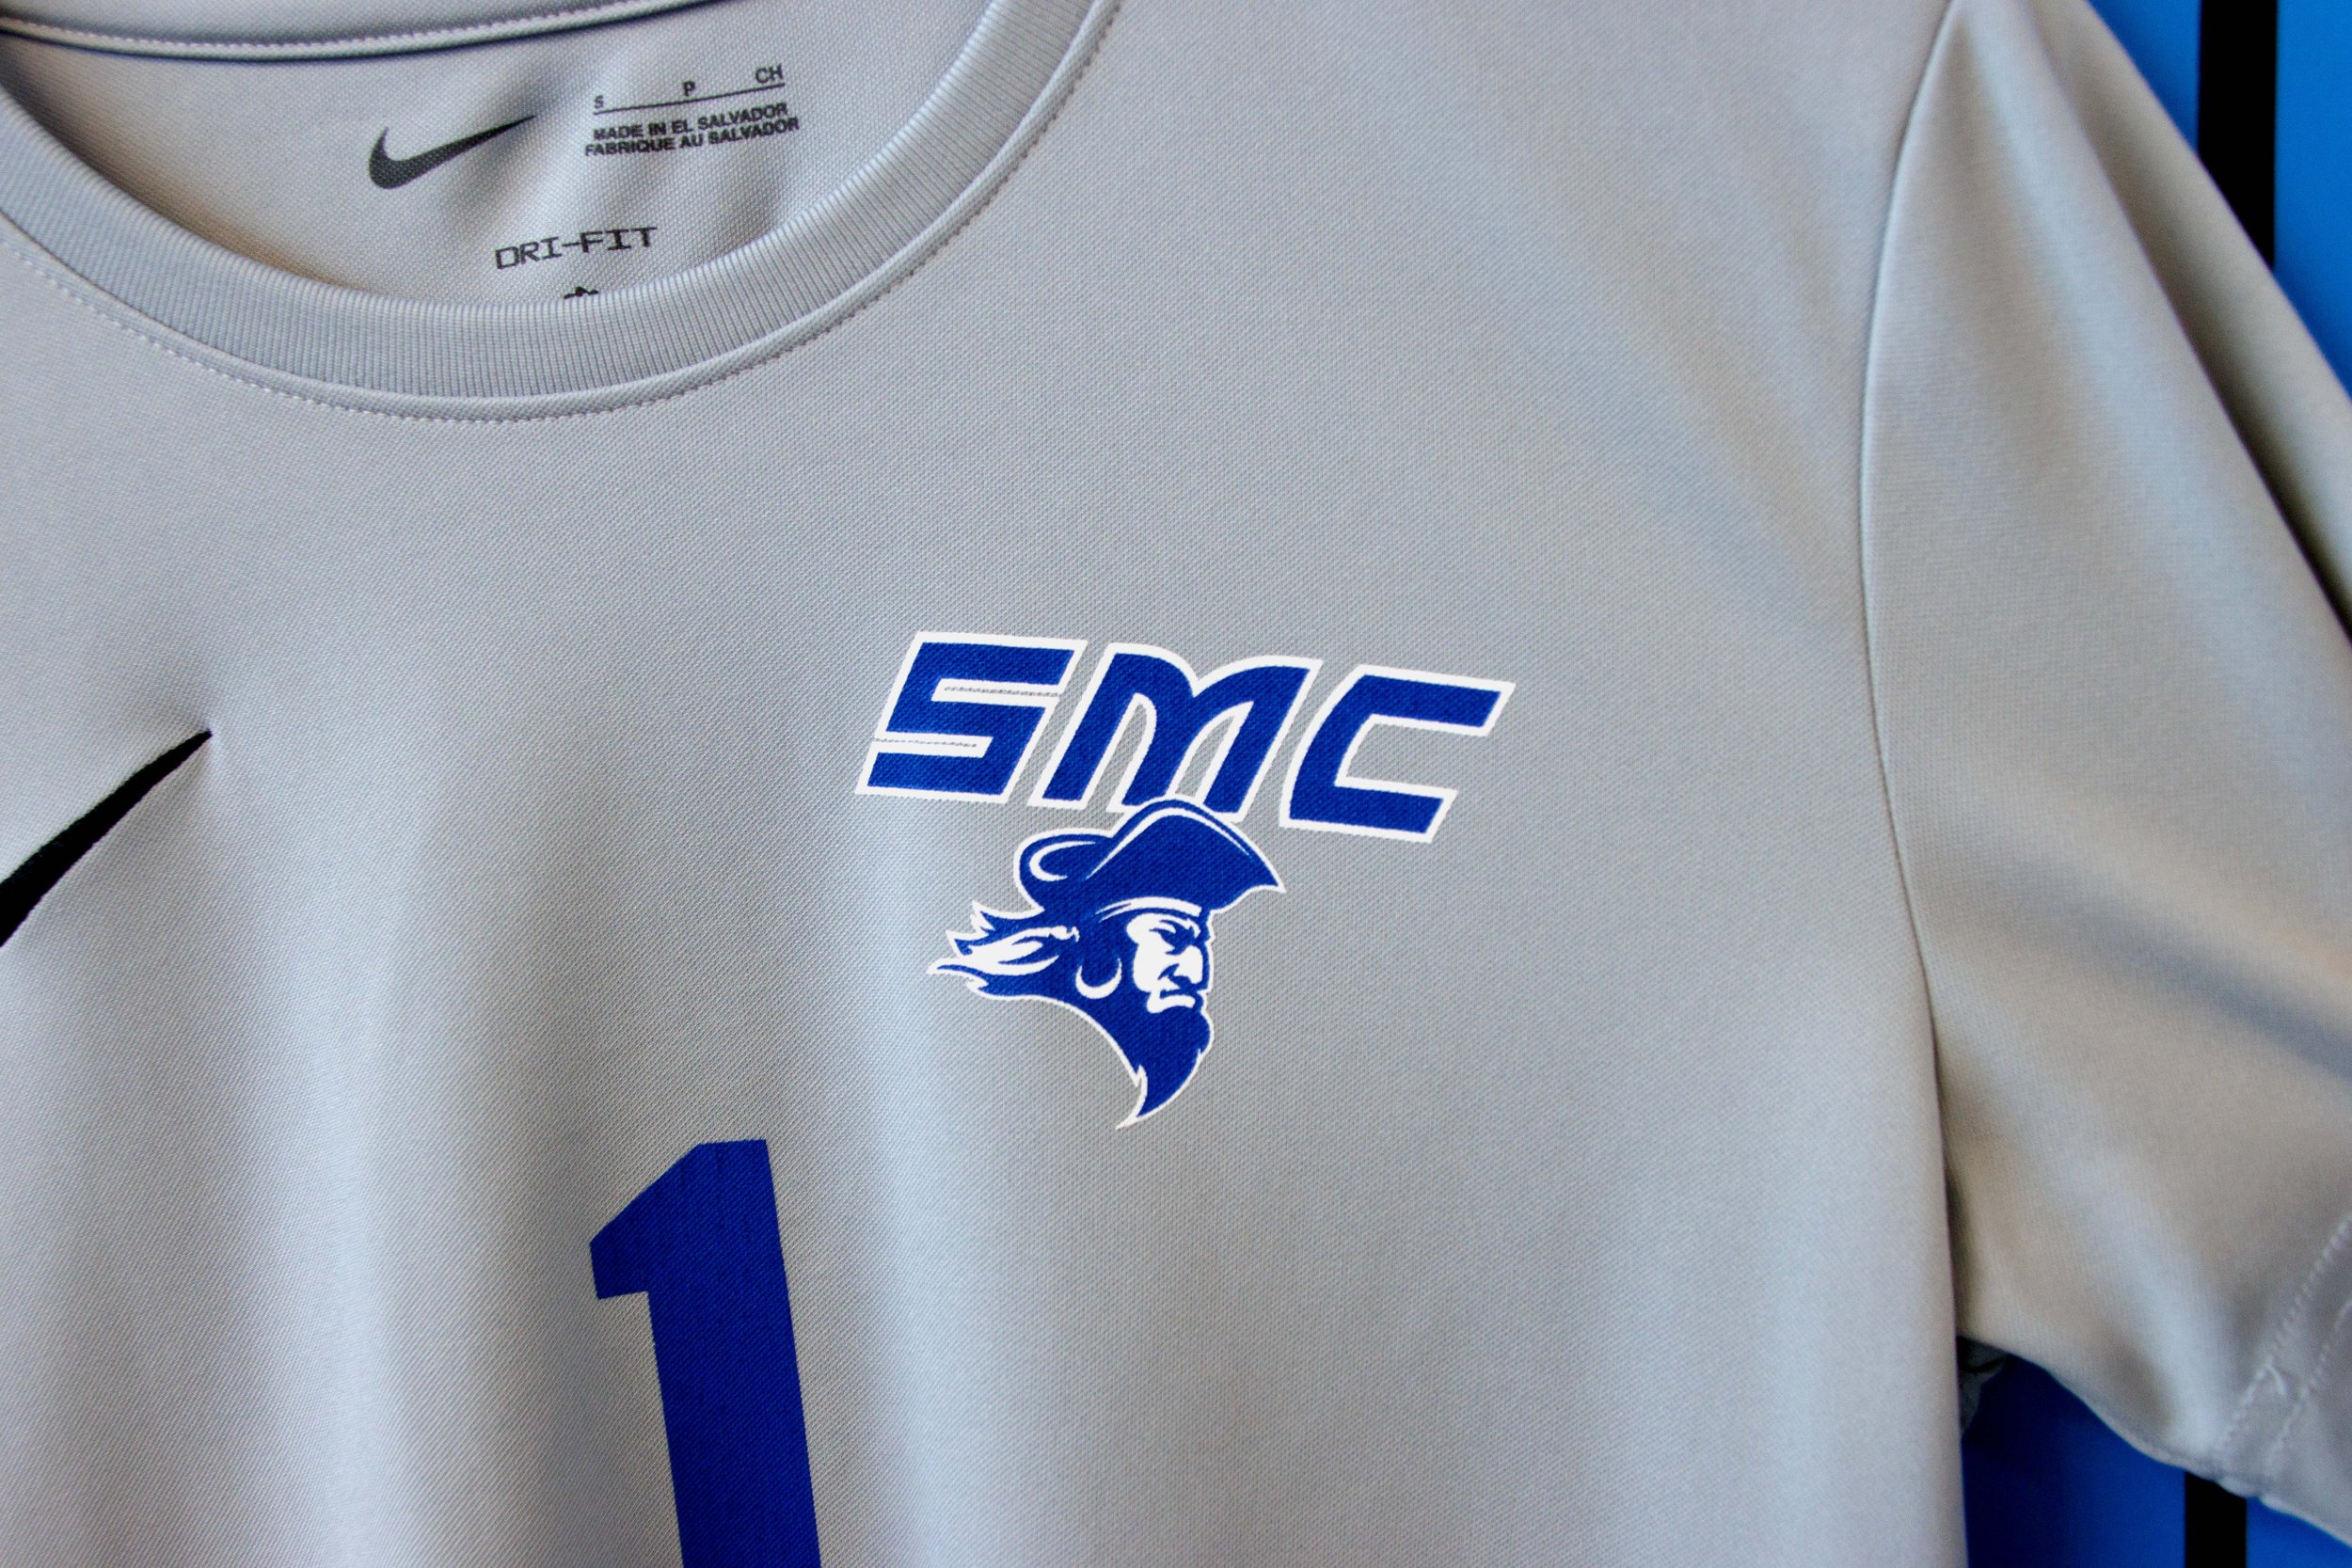  The Santa Monica College (SMC) Corsairs logo is emblazened on the new Men's Soccer team away jersey hung in the men's locker room in The Corsair gymnasium on the SMC main campus, Santa Monica, Calif. on Sept. 07, 2023. (Danniel Sumarkho | The Corsai